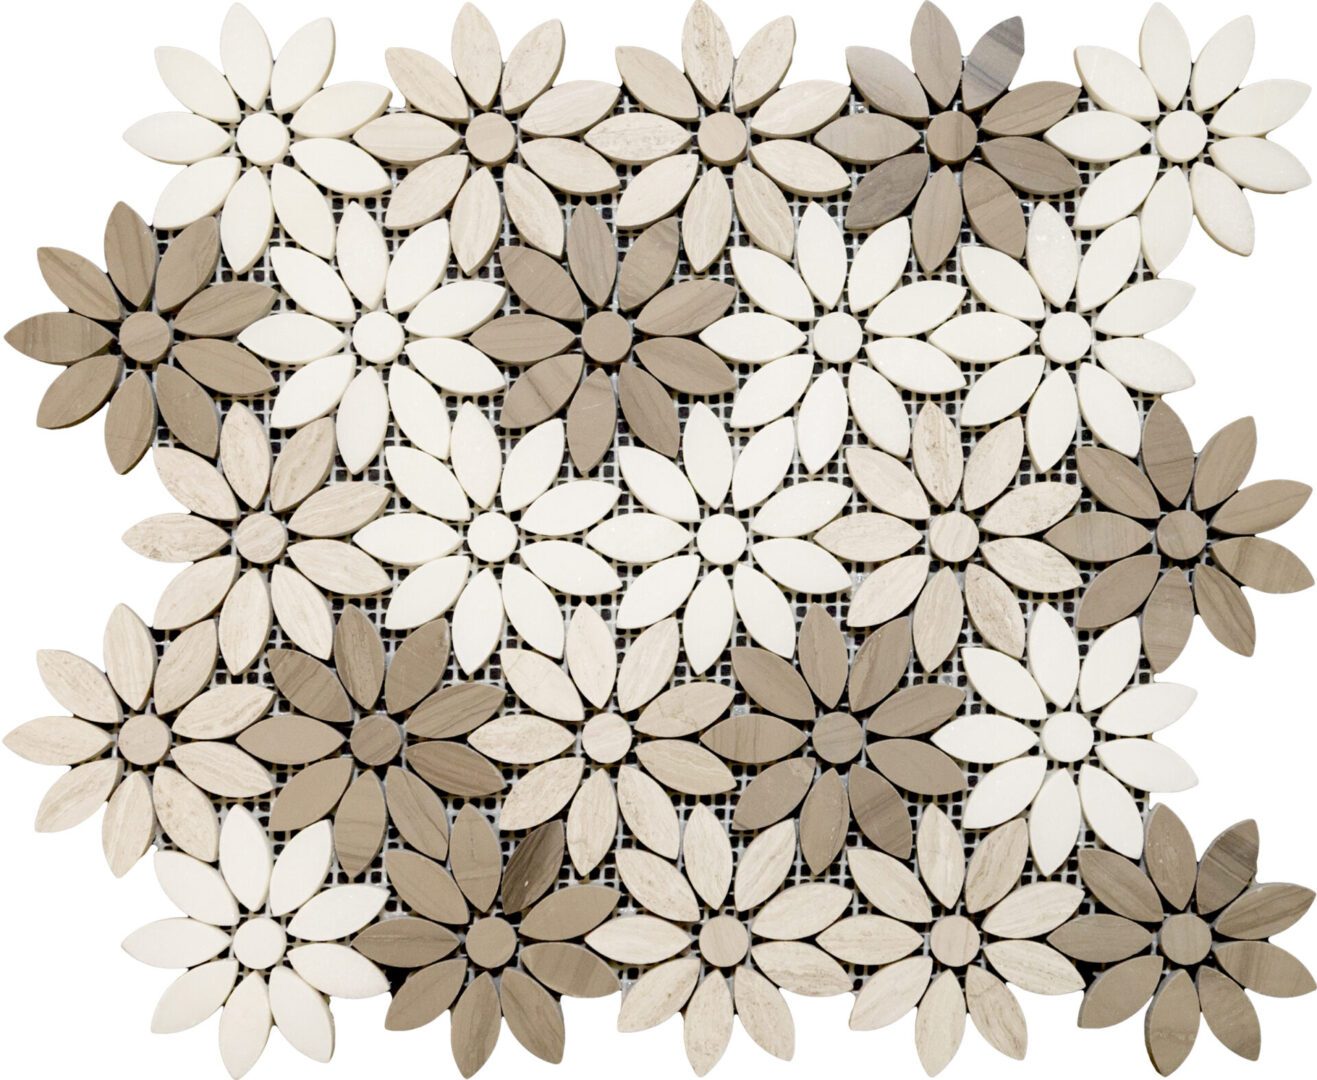 A flower pattern mosaic tile is shown in shades of brown and white.